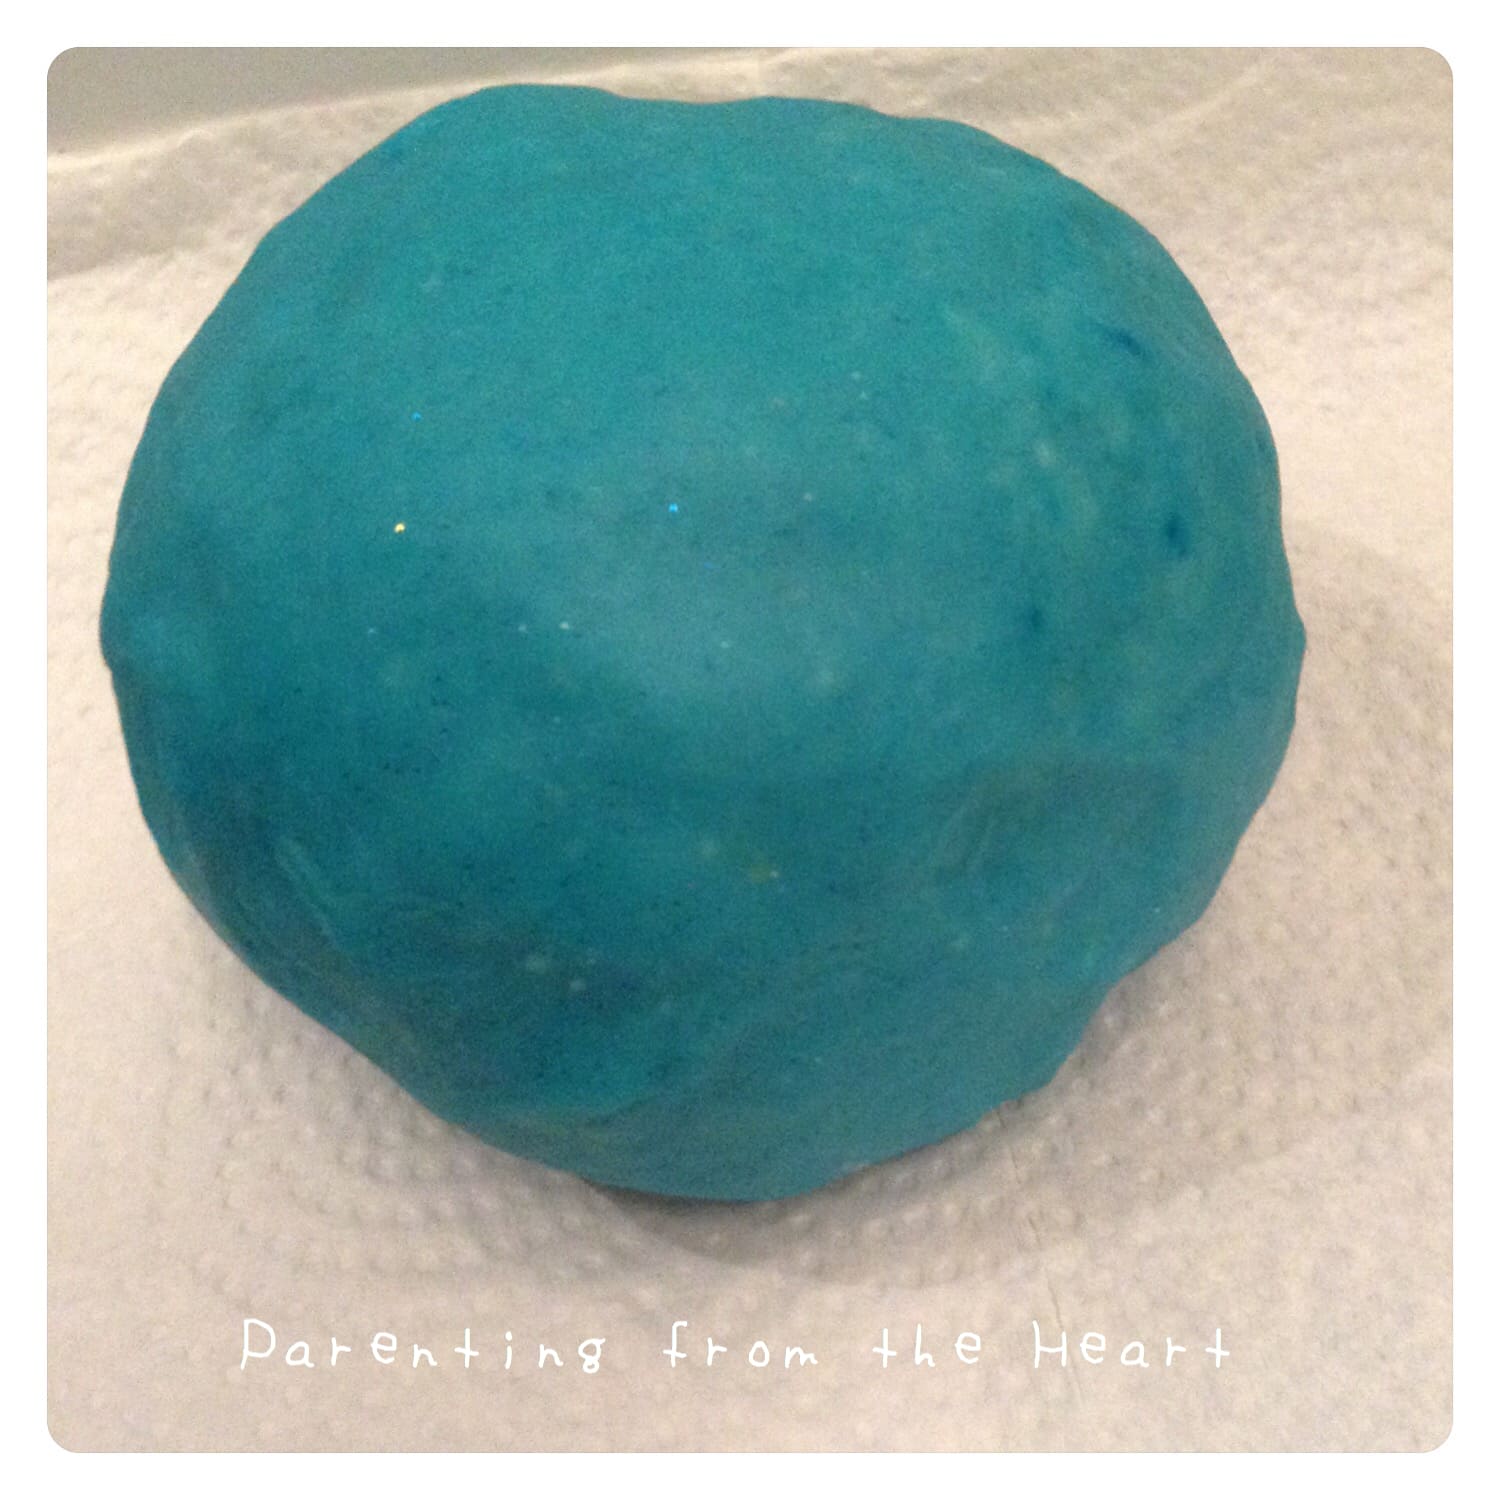 Best smelling play dough recipe